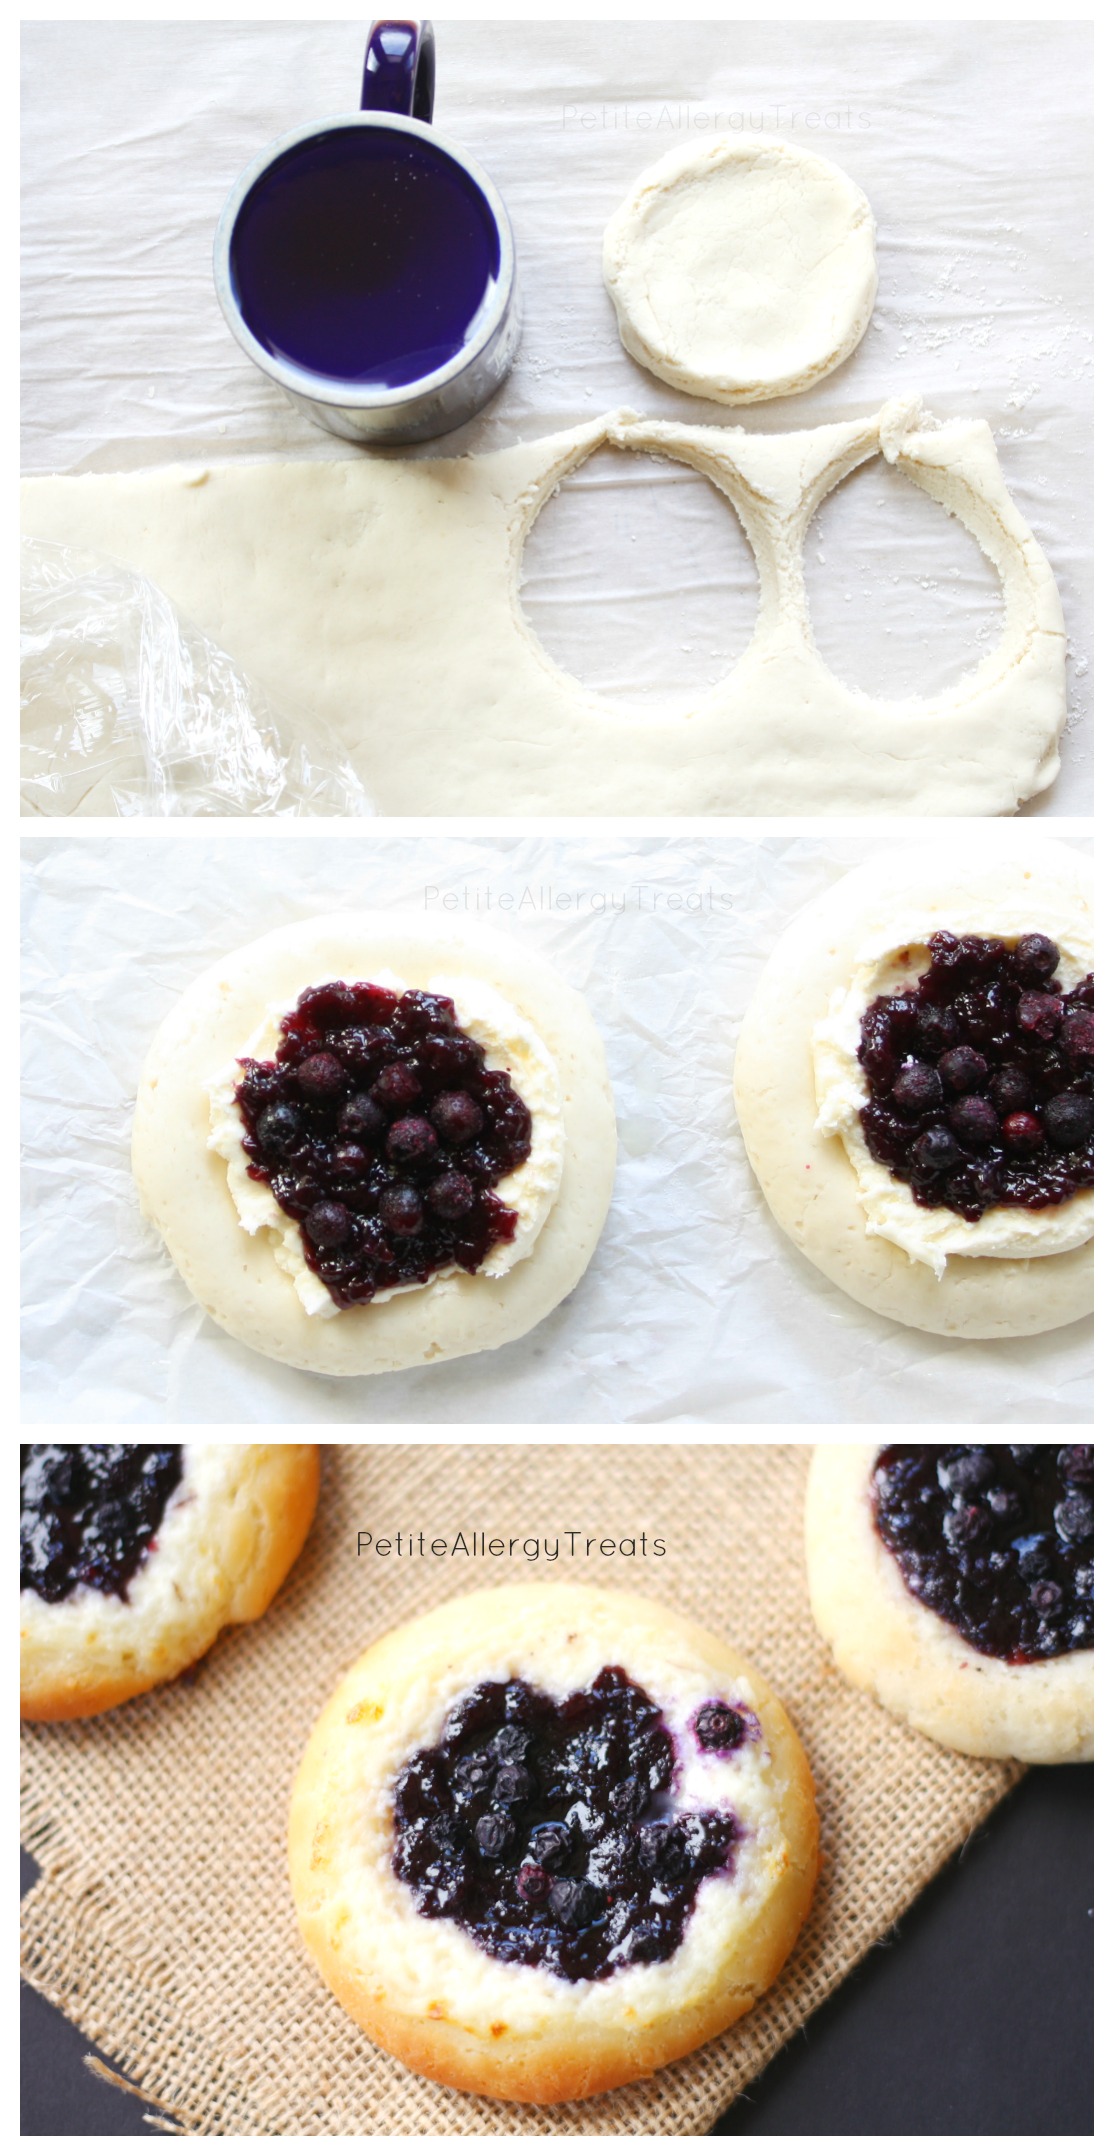 Gluten Free Blueberry Danish (egg free)- Delicious easy blueberry and mascarpone cheese danish. You'd never know it's gluten free.